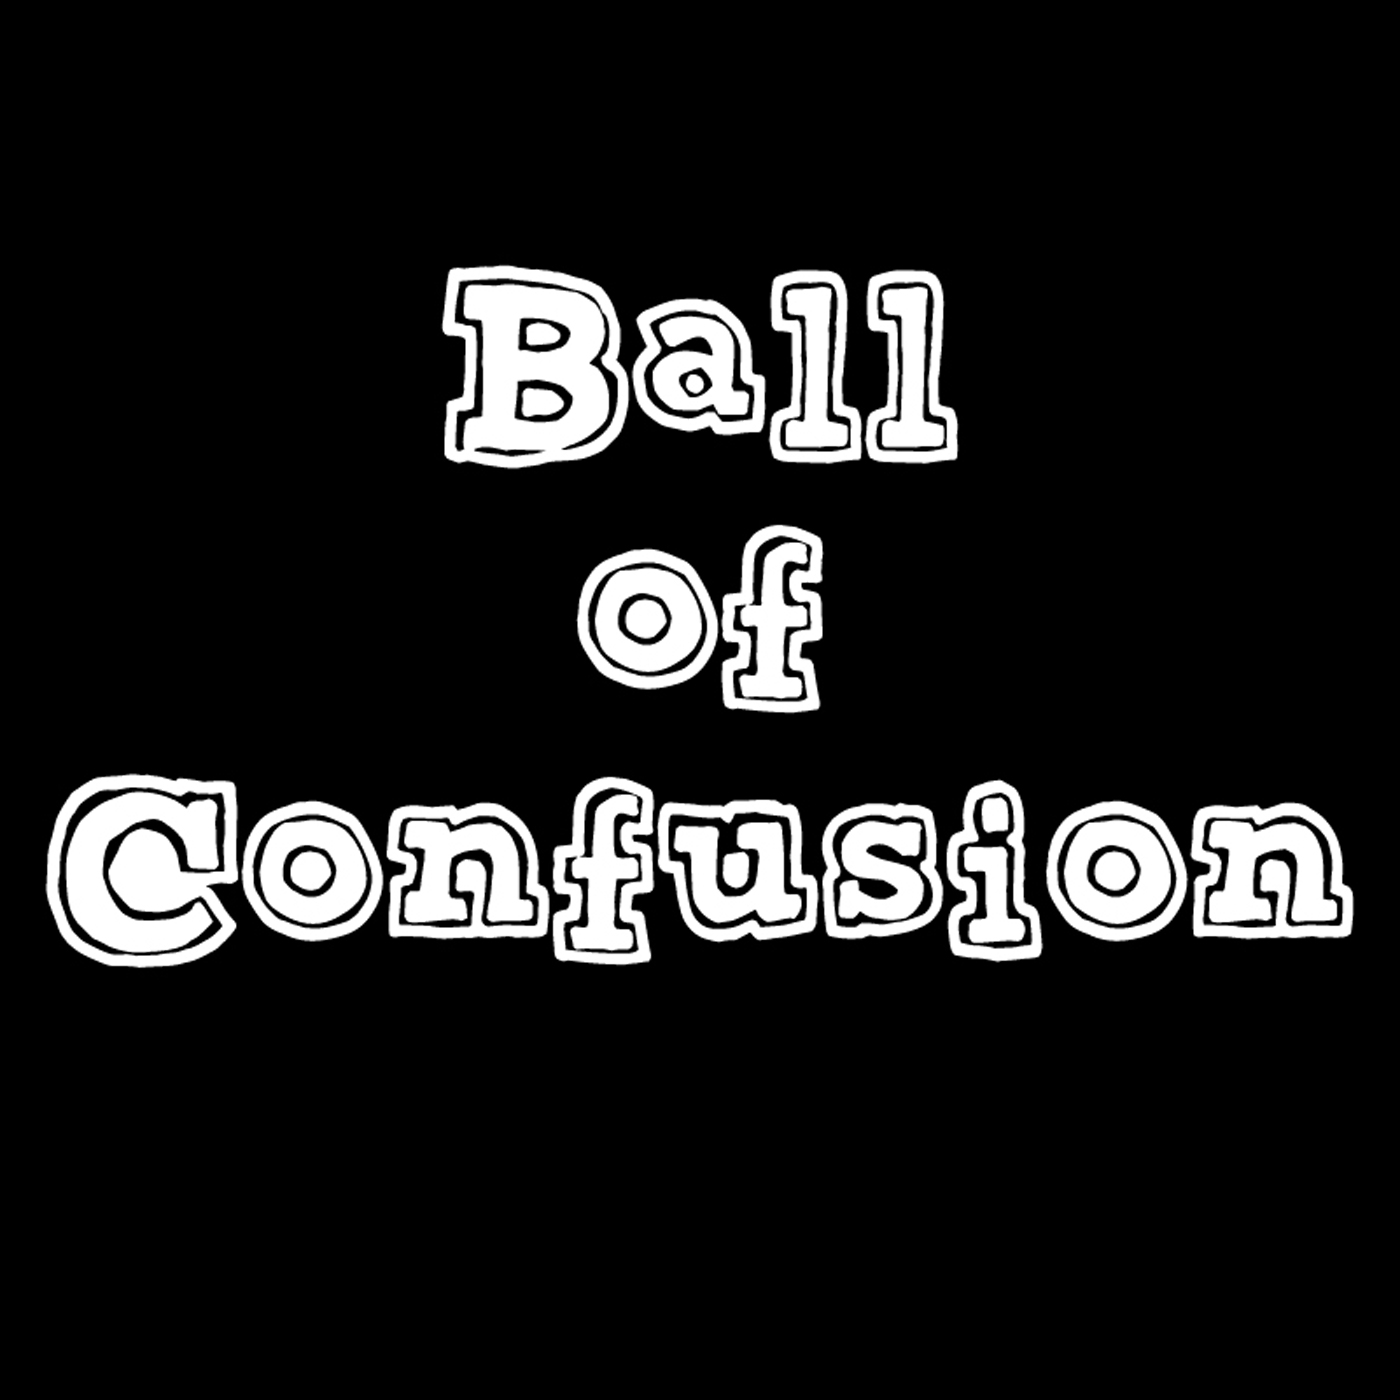 Ball of Confusion